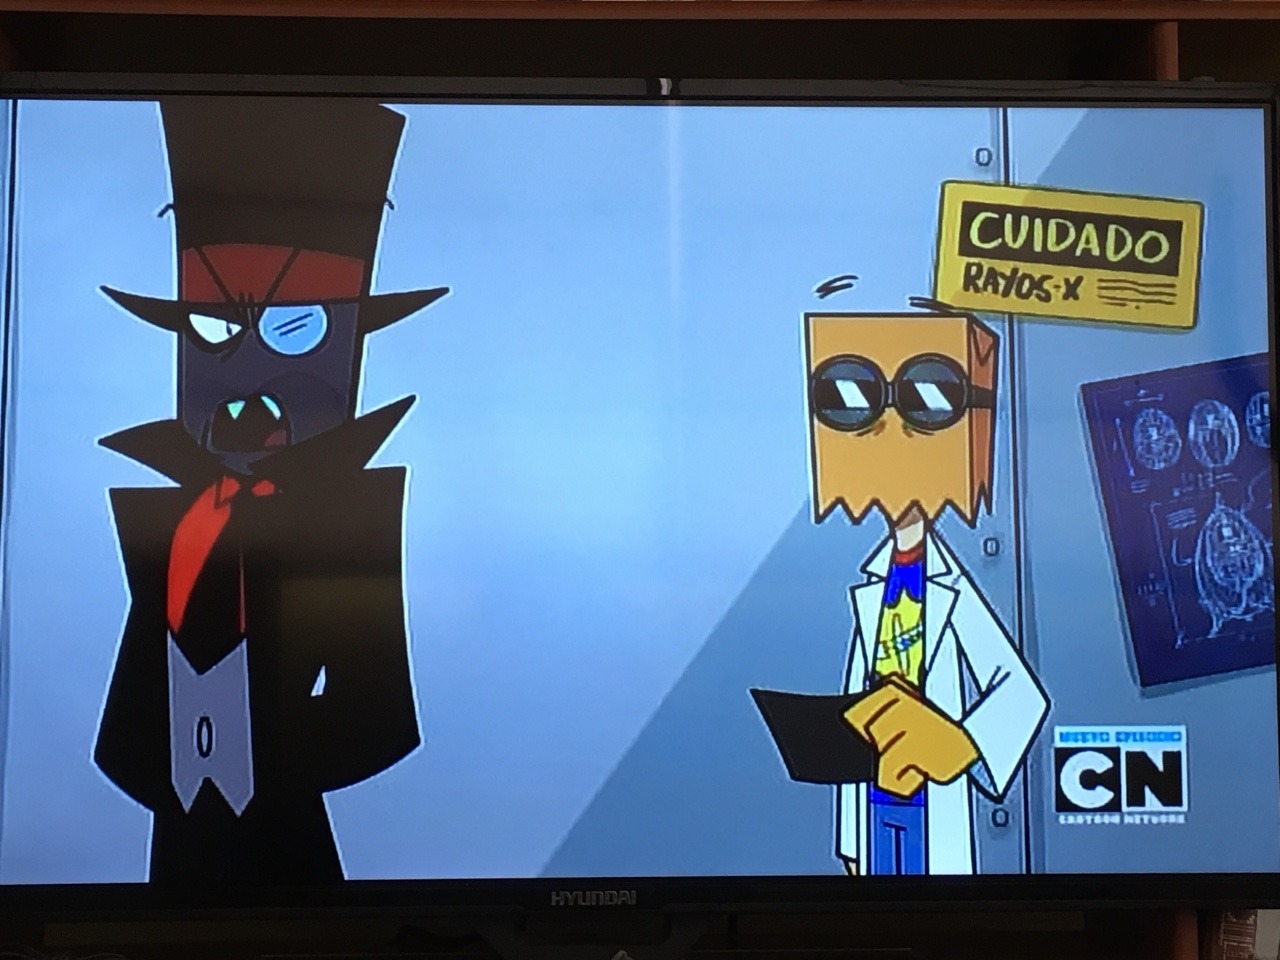 Yes, it appears TMTV and “Villainous Fillers” are just the tv airing of the orientation videos. Nothing new.Still, its cool to see Villainous on TVThey do have spots from time to time of black hat when they change from show to show after commercials.